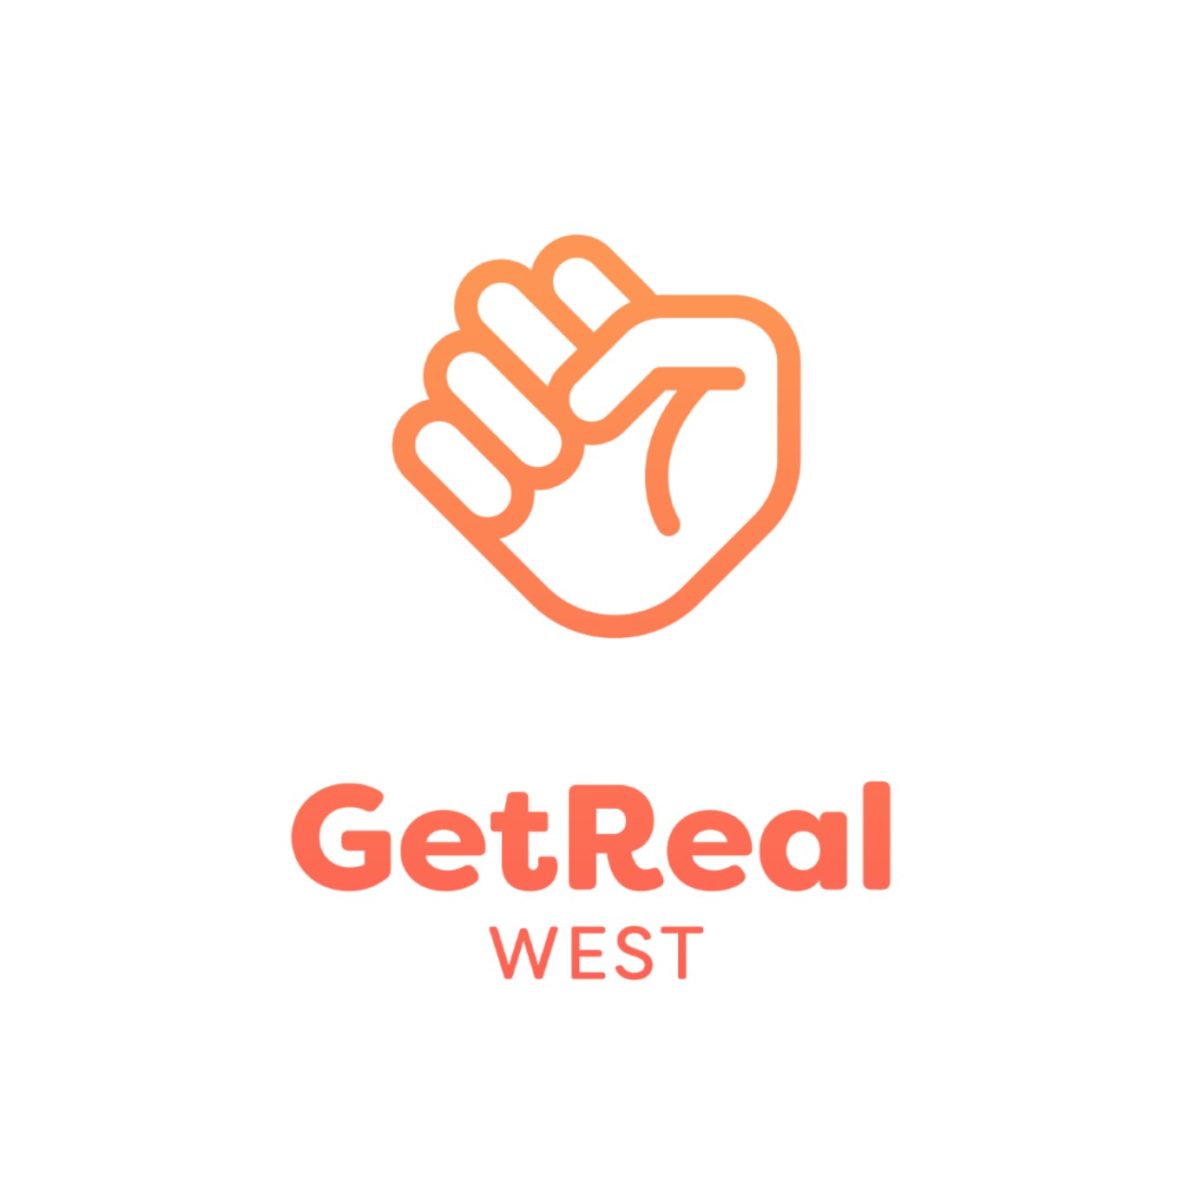 Get Real West